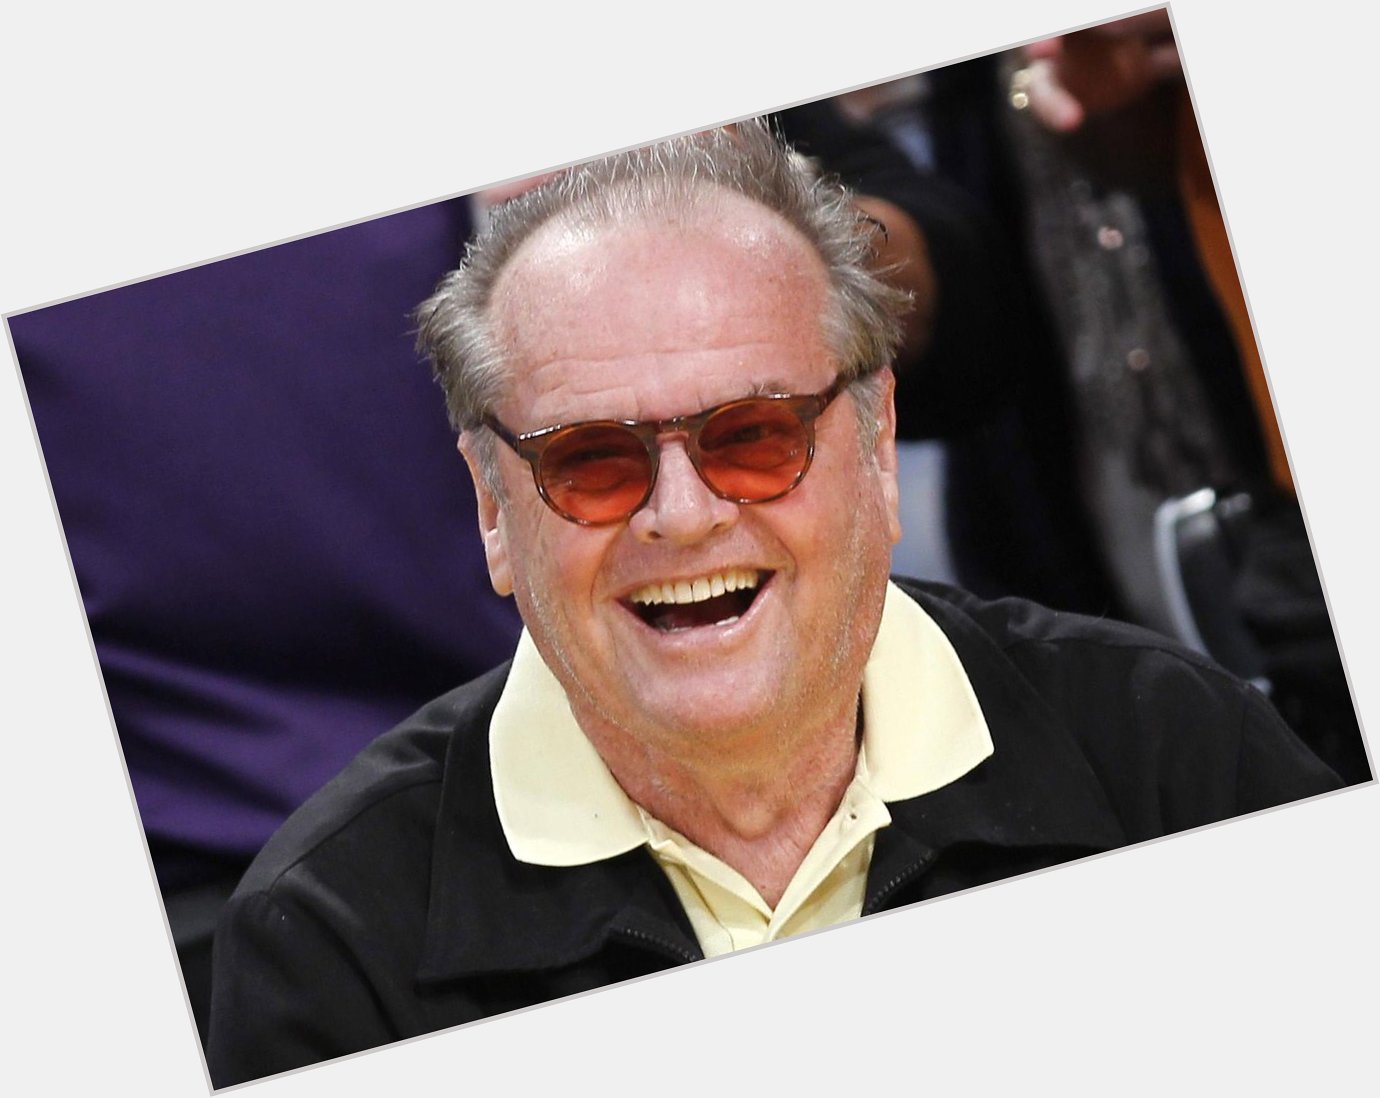 Happy to Jack Nicholson & Amber Heard! Check out more bdays  